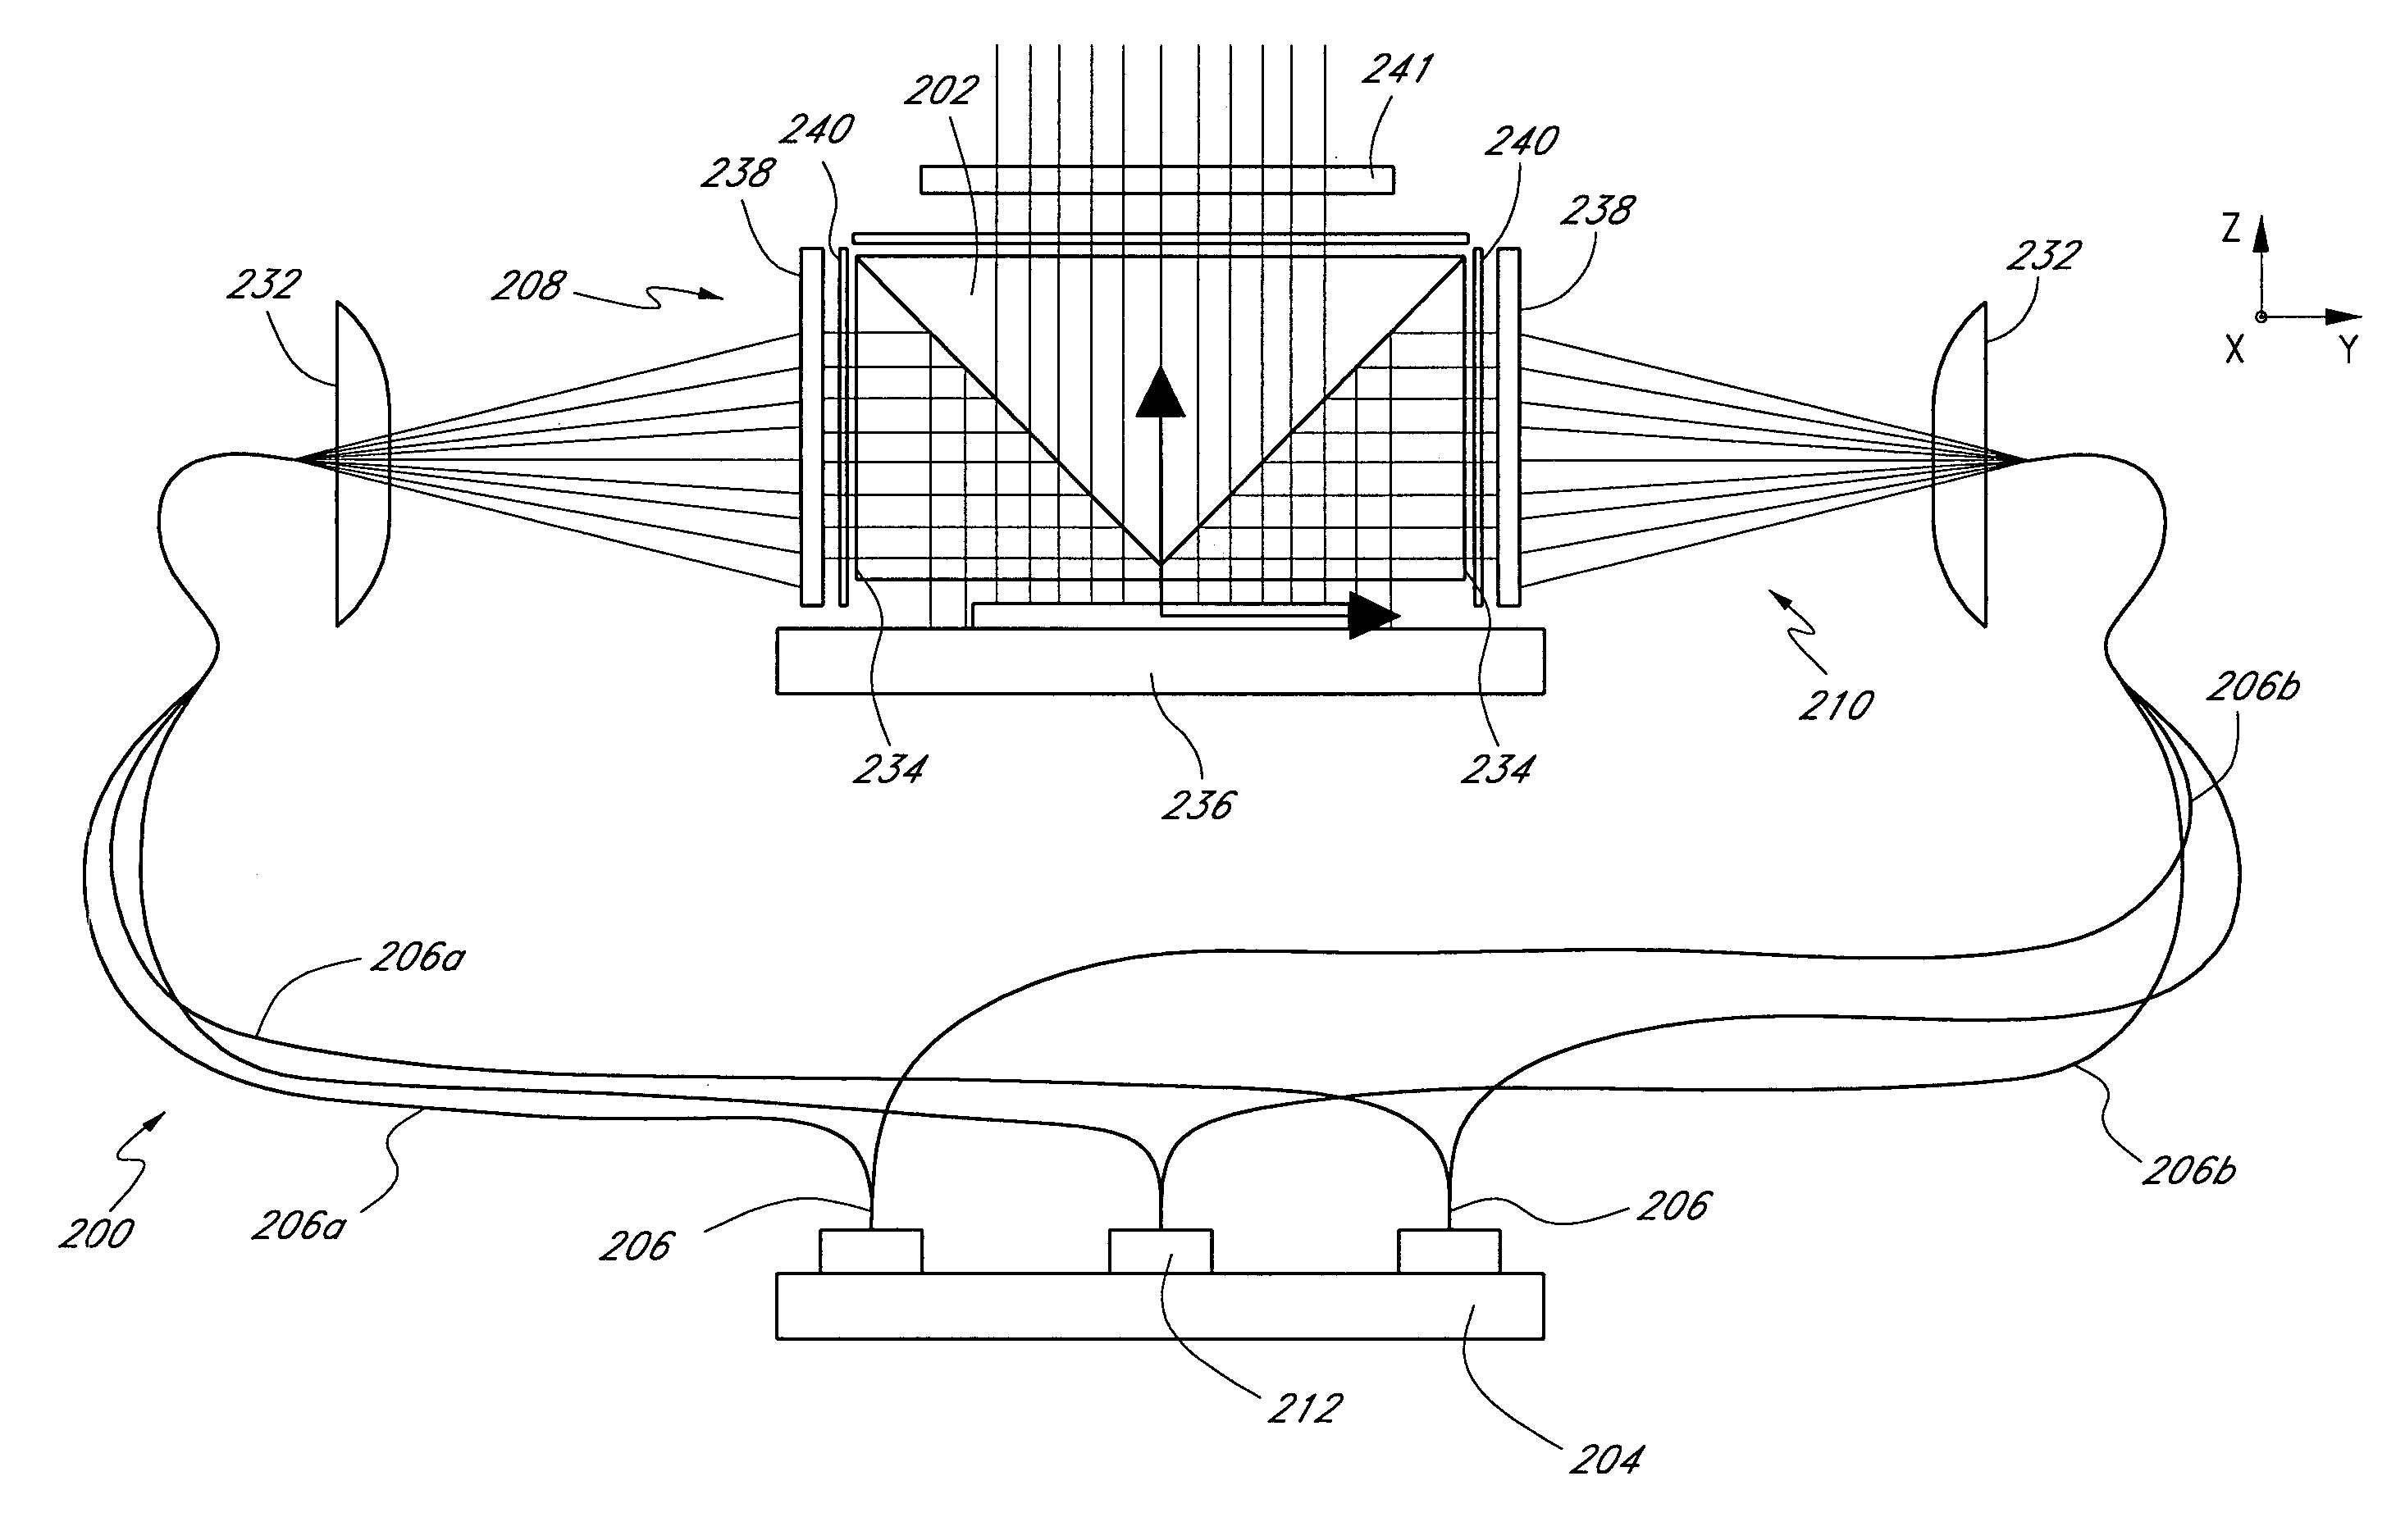 Apparatus and methods for illuminating optical systems